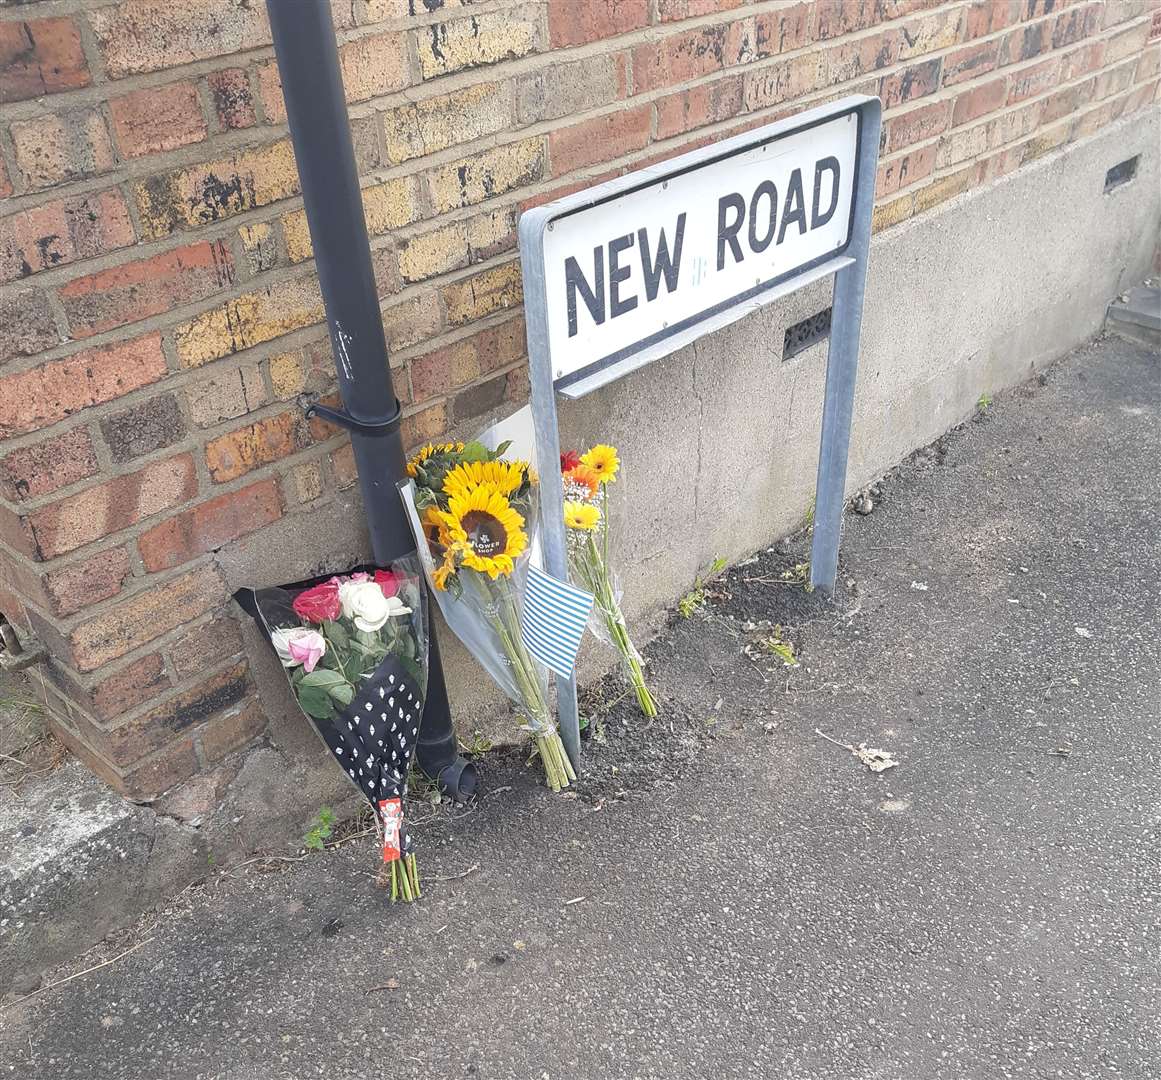 Floral tributes at the scene of a fatal crash on Swanley Lane at the junction with New Road where 19-year-old cyclist Jack Bruce from Dartford was killed